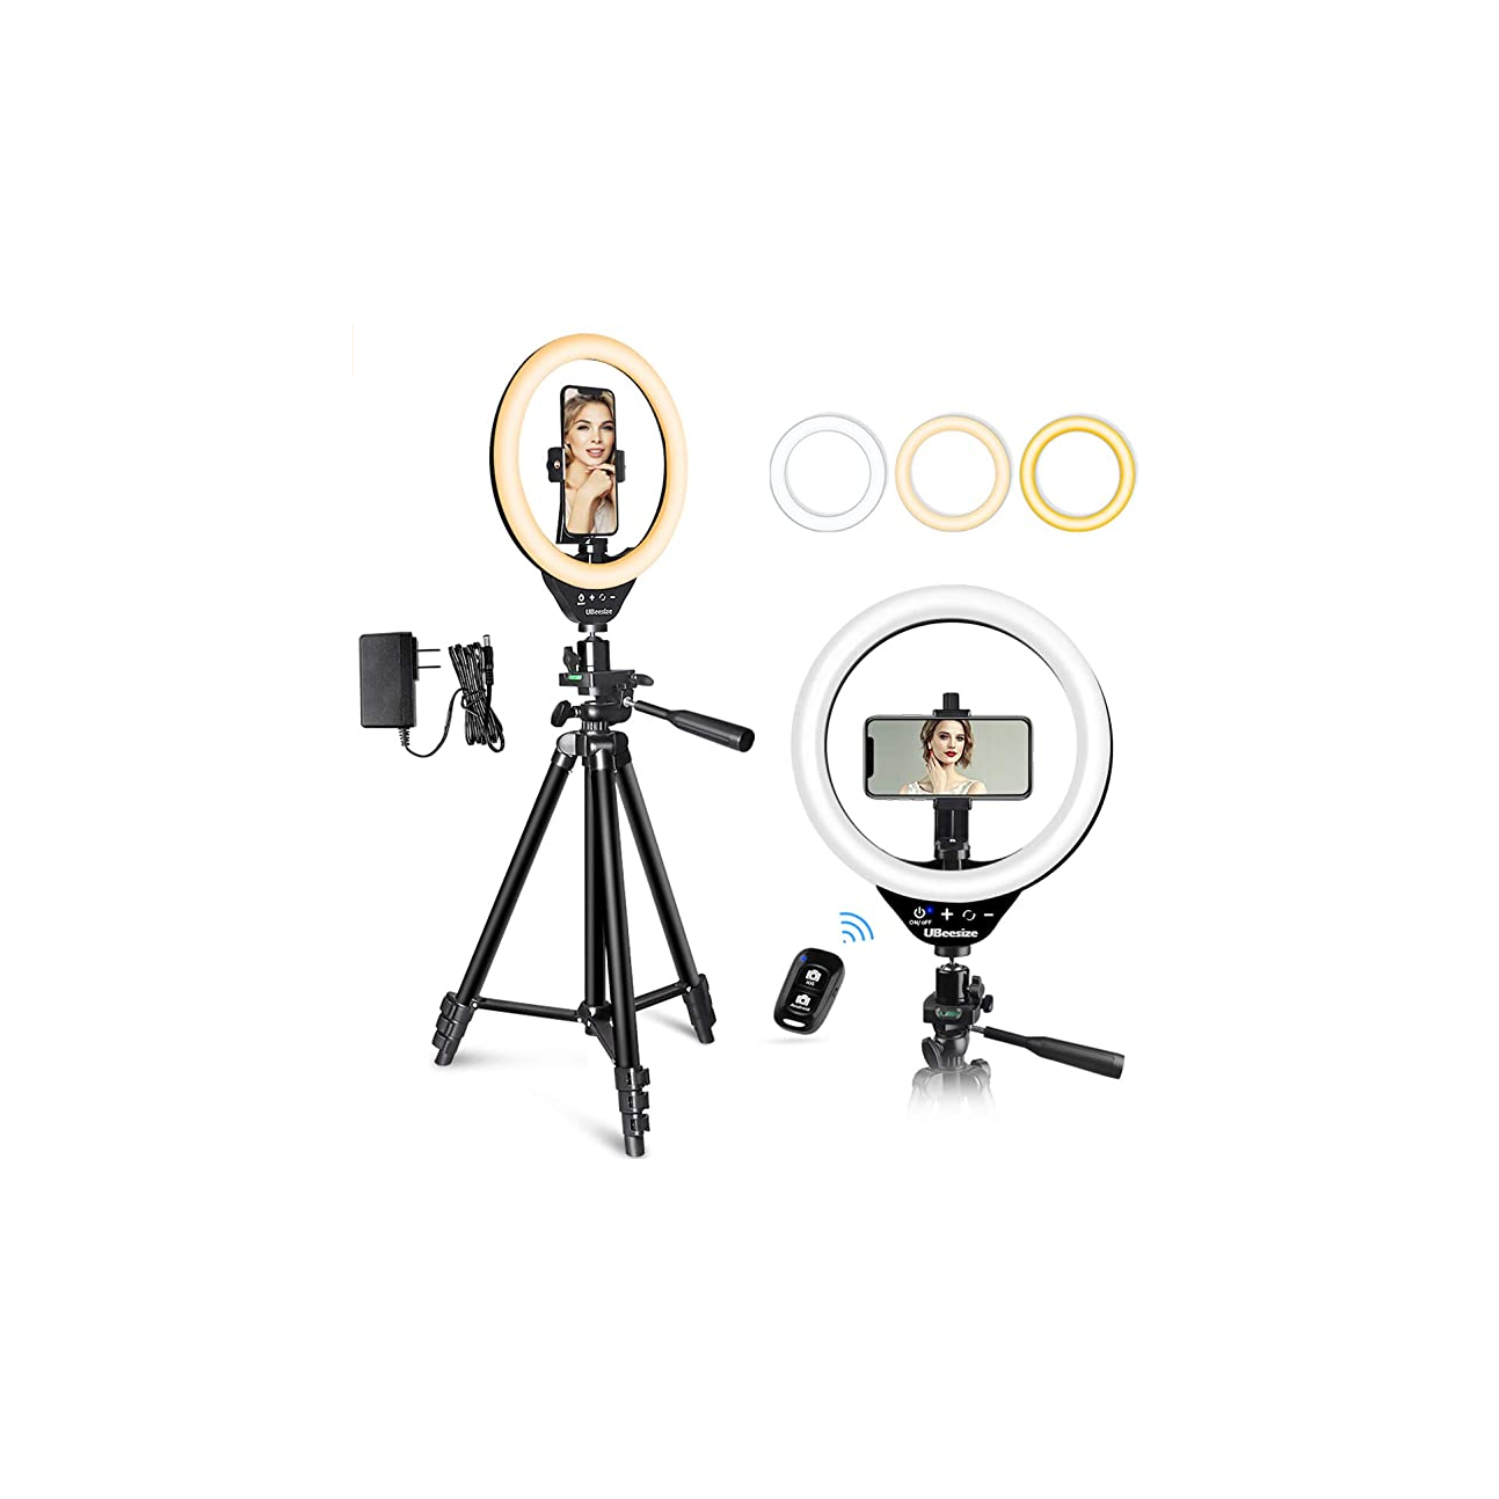 UBeesize 10’’ LED Ring Light with Stand and Phone Holder, UBeesize Selfie Halo Light for Photography/Makeup/Vlogging/Live Streaming, Compatible with Phones and Cameras (2020 Version)